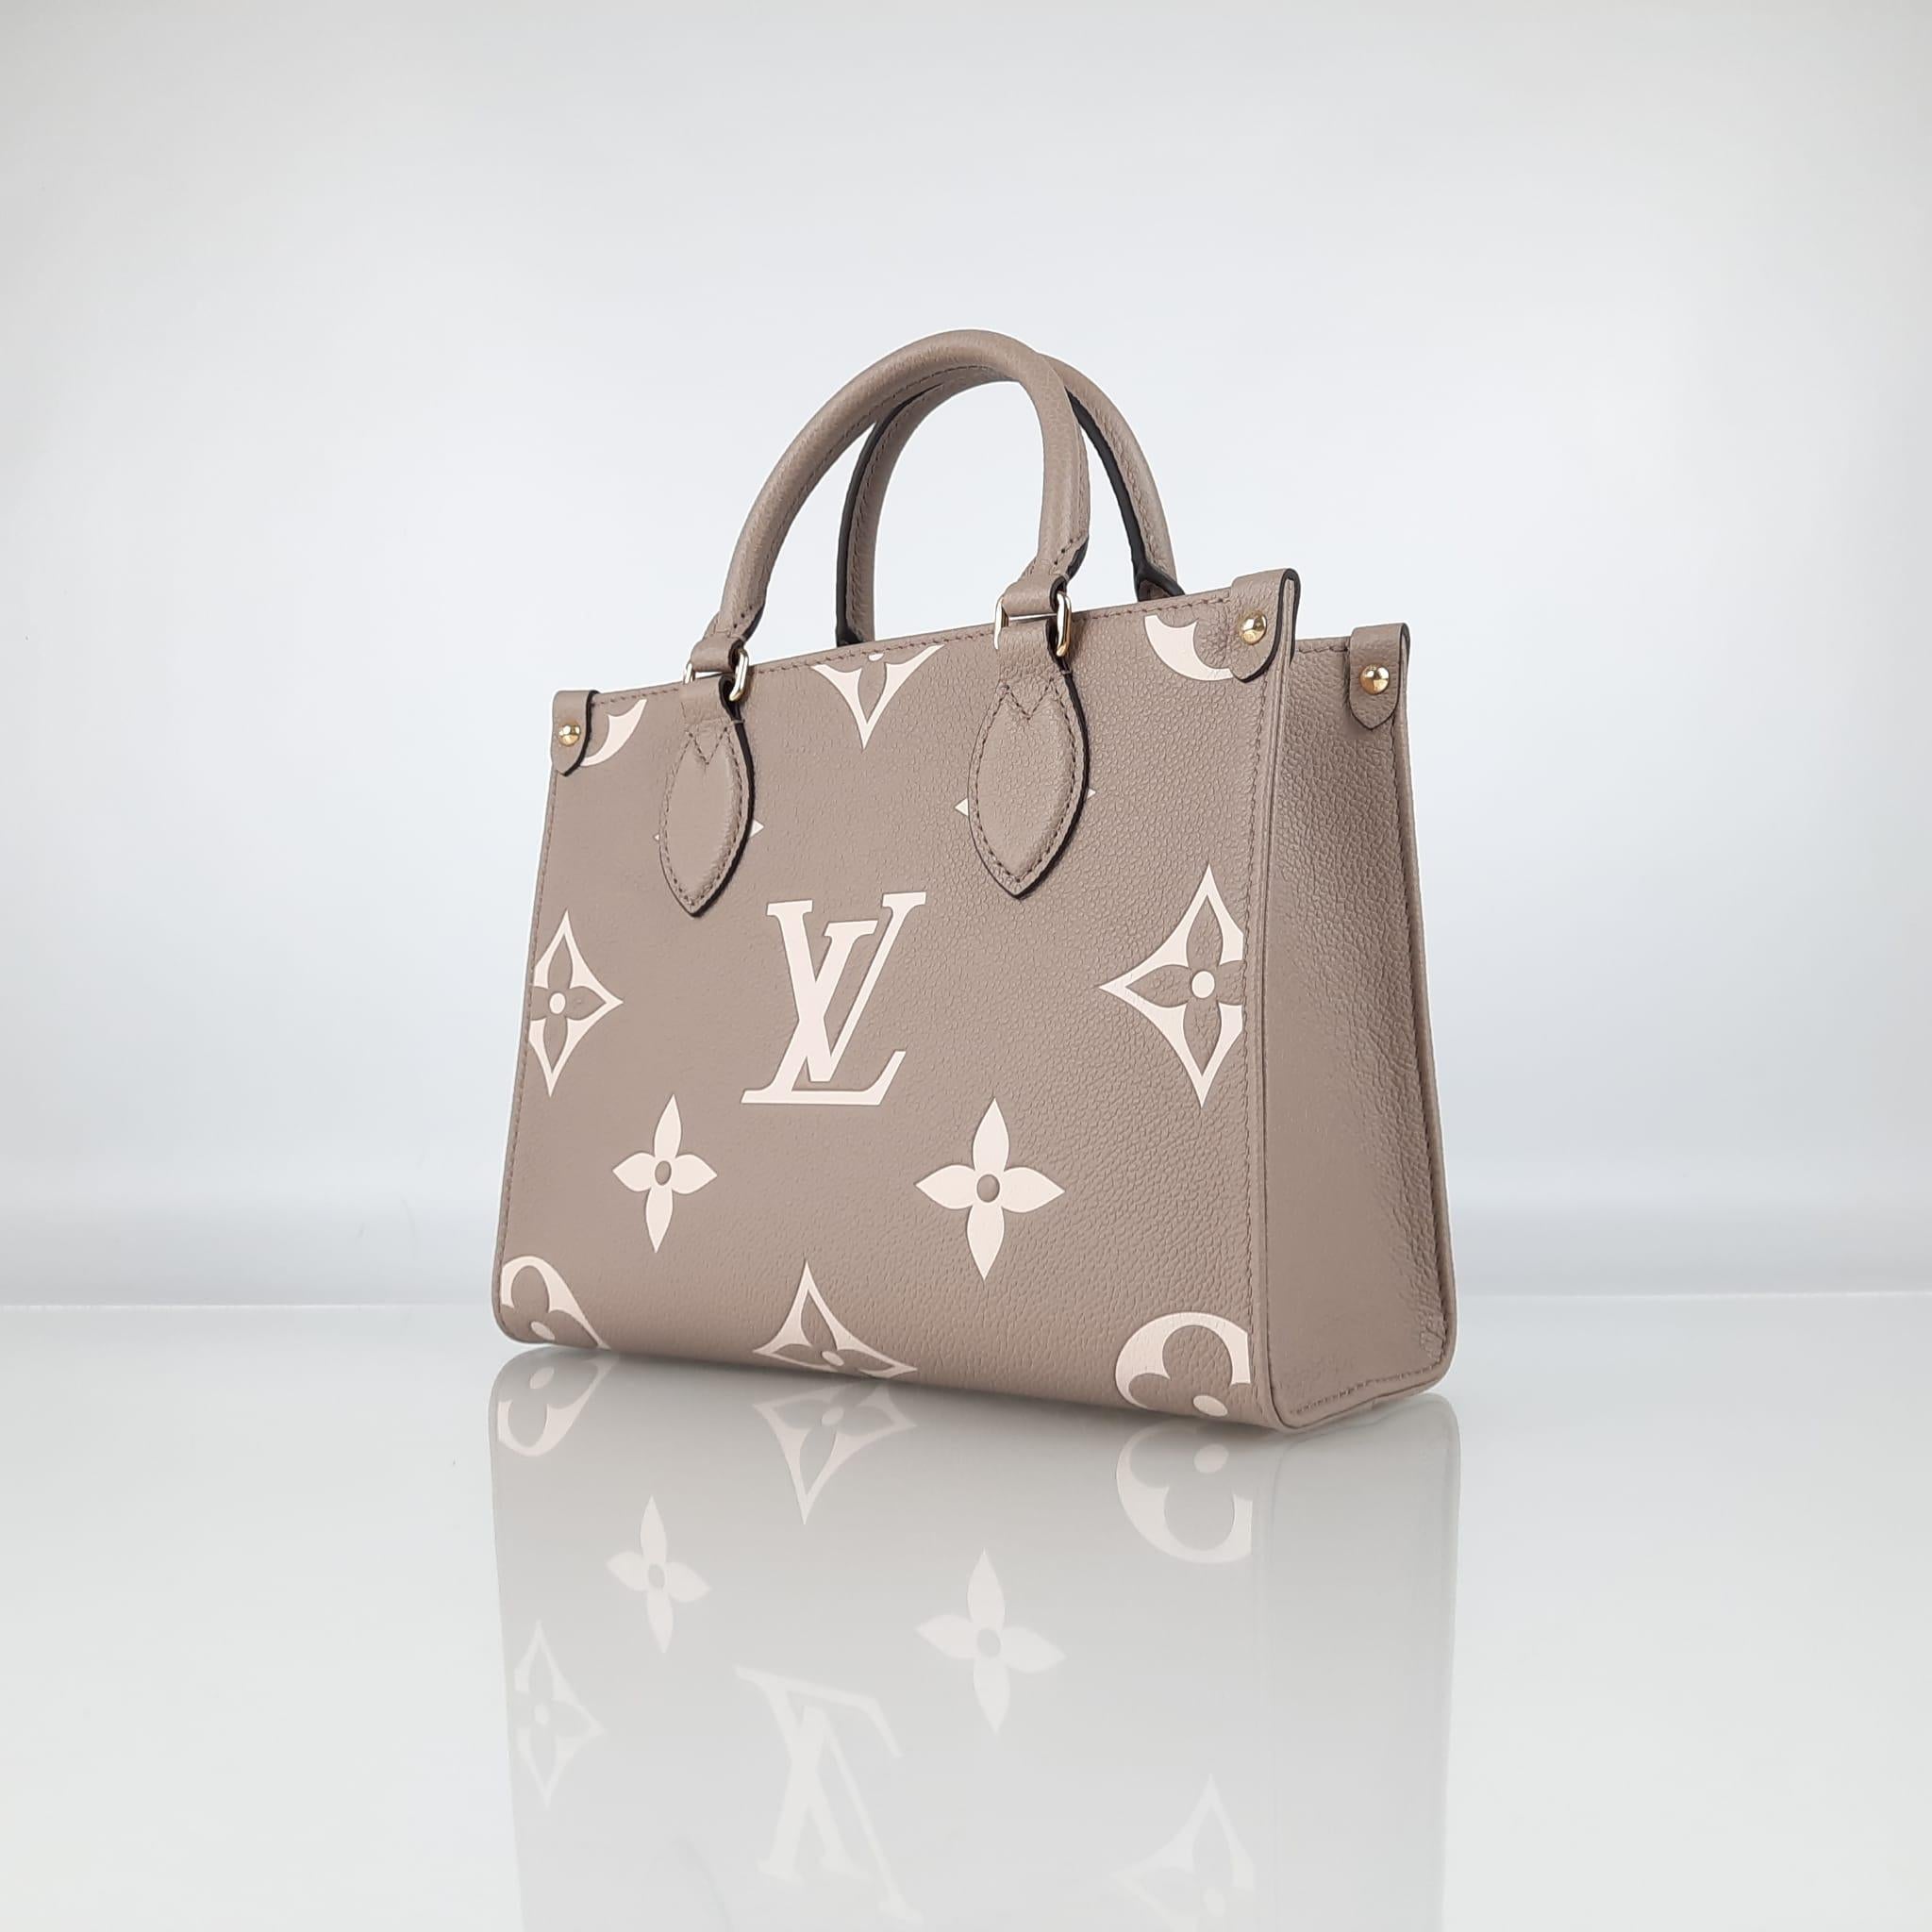 Inspired by Louis Vuitton’s famous Sac Plat from 1968, the Onthego PM Tote Bag is fashioned in Monogram Empreinte leather, embossed with a Medium Two-Tone Monogram pattern. This smaller version of the original Onthego fits essentials such as an iPad